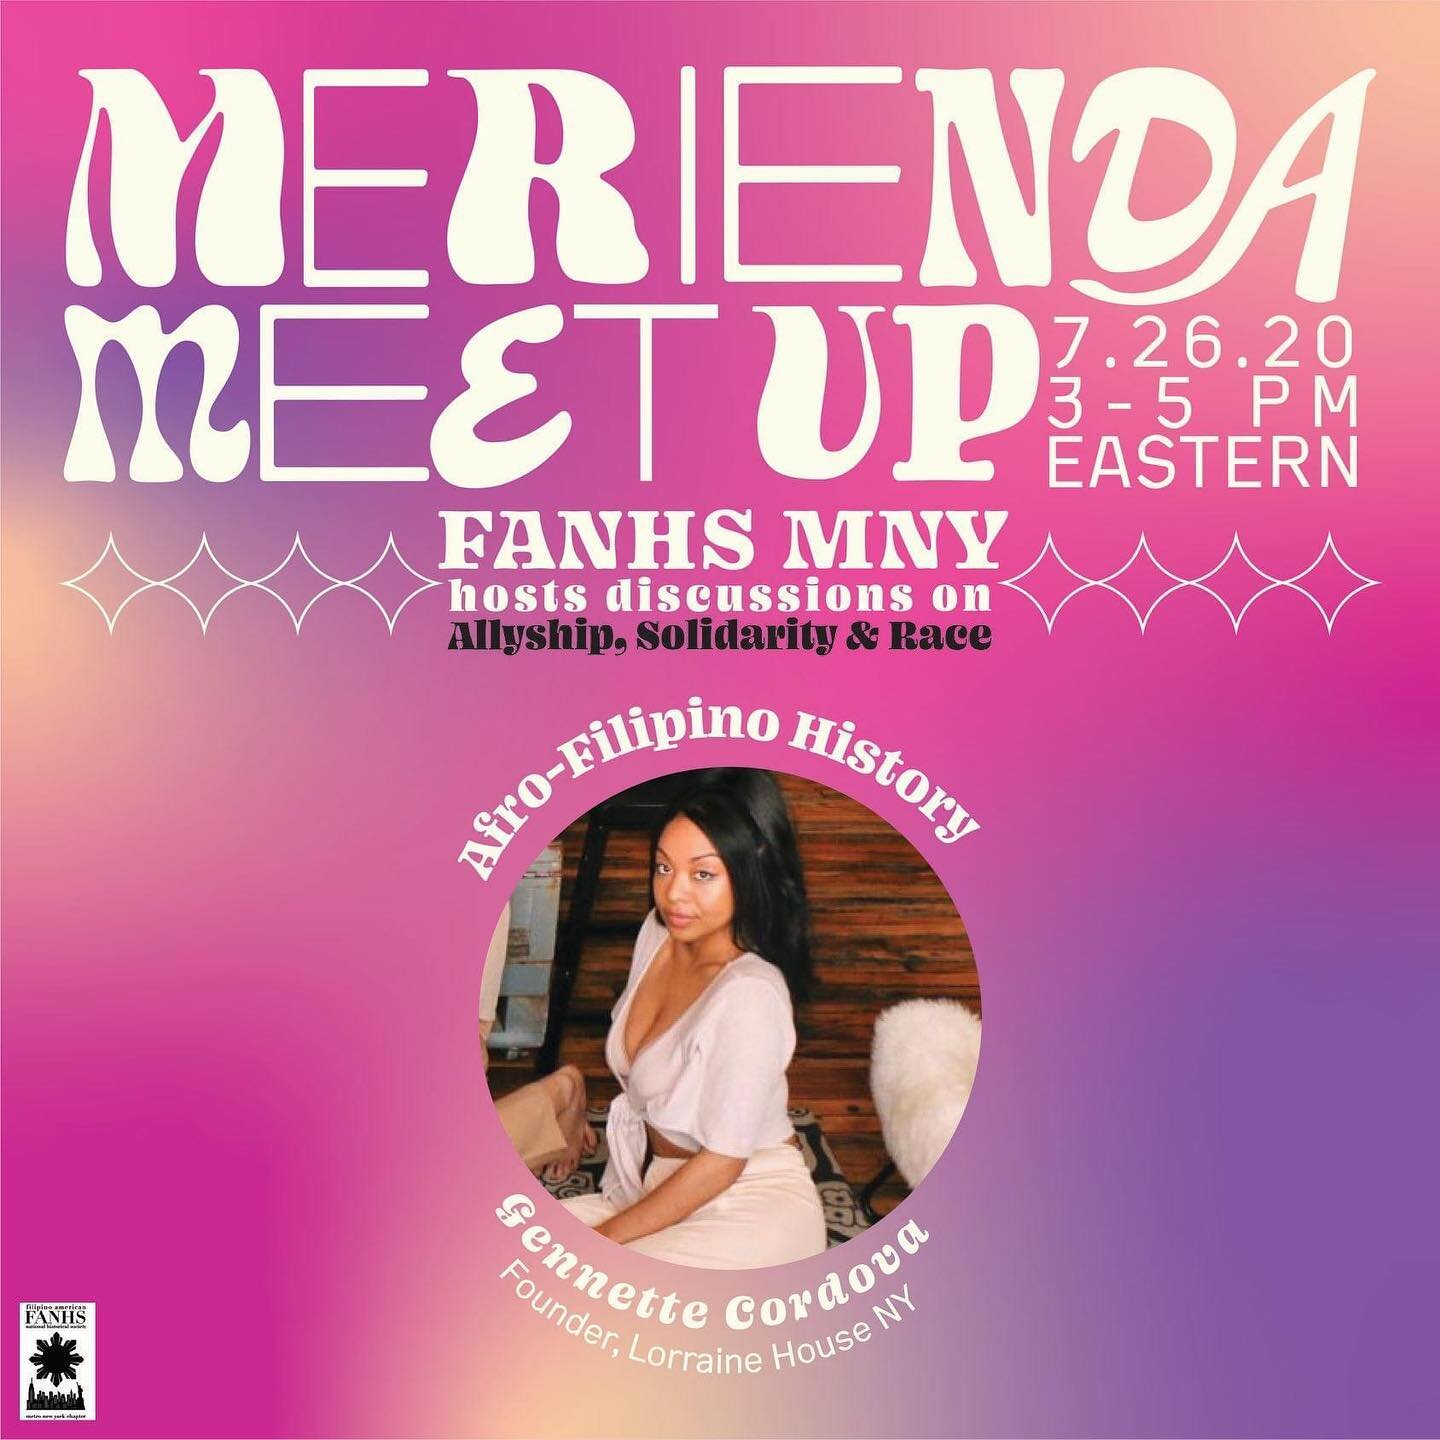 FANHS MNY Presents: Merienda Meetup 2.0 Speaker Introductions!

&quot;Afro-Filipino History&quot; - by Genette Cordova

A talk centered around Afro-Filipino History. A brief history of people from both Black and Filipino backgrounds, including most o